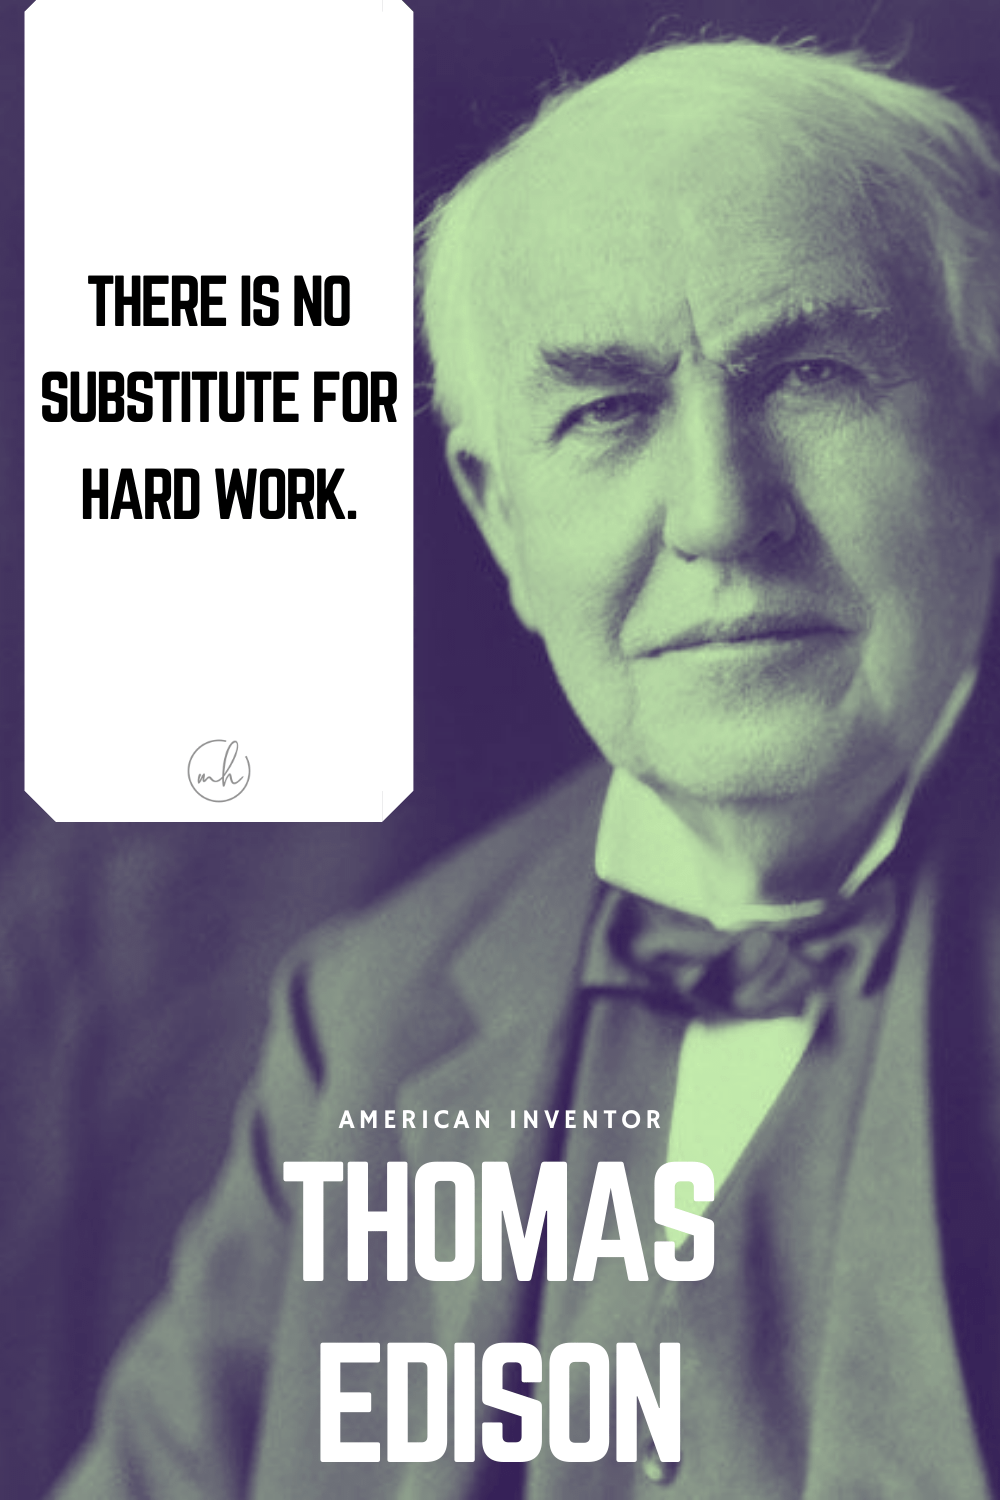 "There is no substitute for hard work." - Thomas Edison